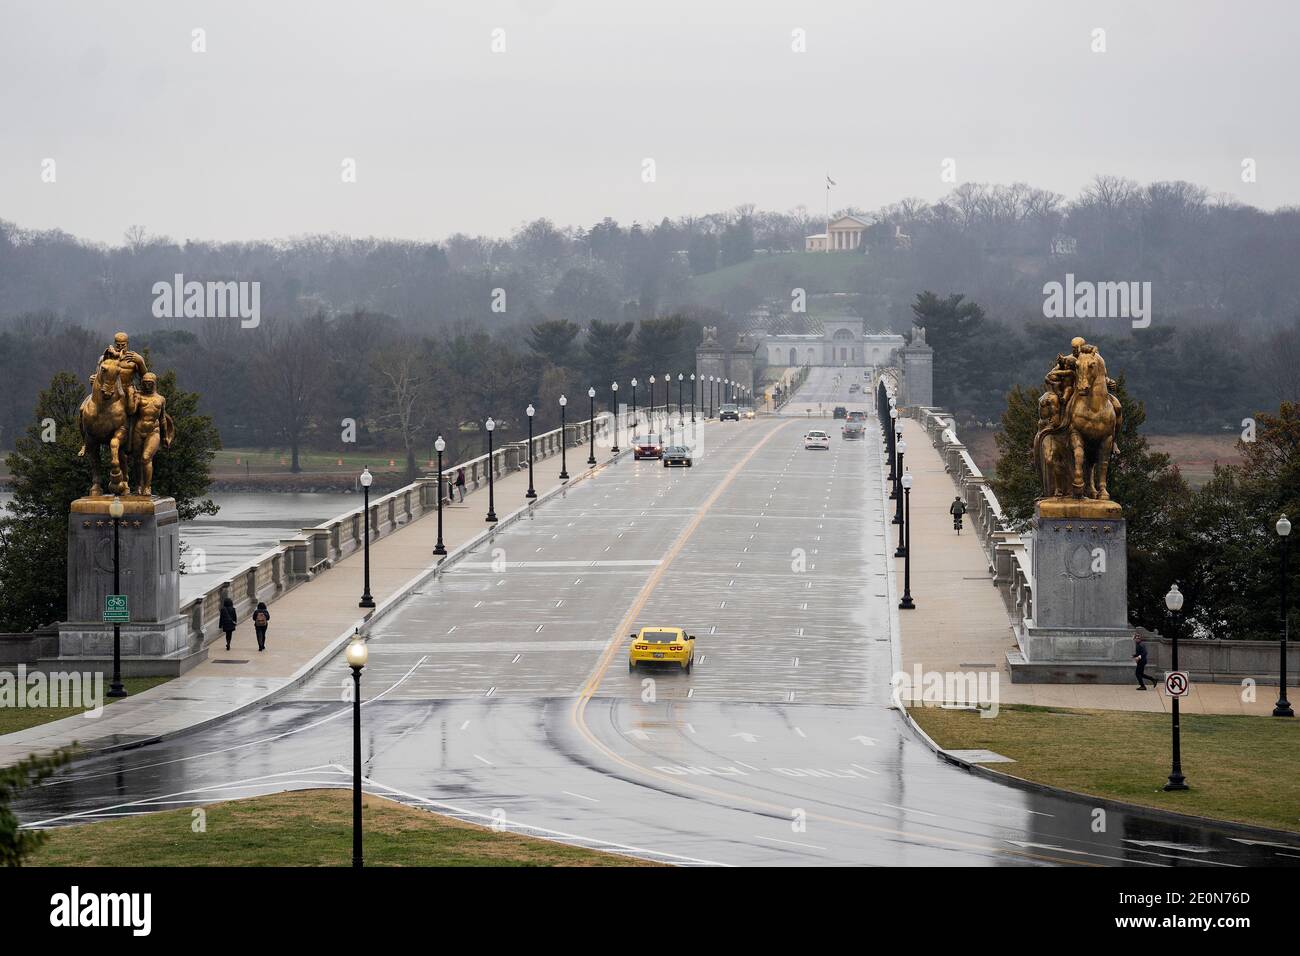 Washington, USA. 1st Jan, 2021. Photo taken on Jan. 1, 2021 shows a road with few cars in Washington, DC, the United States. The confirmed COVID-19 cases in the United States topped 20 million on Friday as the discovery of a highly contagious new virus strain in the country increases pressure to speed up the vaccination process. Credit: Liu Jie/Xinhua/Alamy Live News Stock Photo